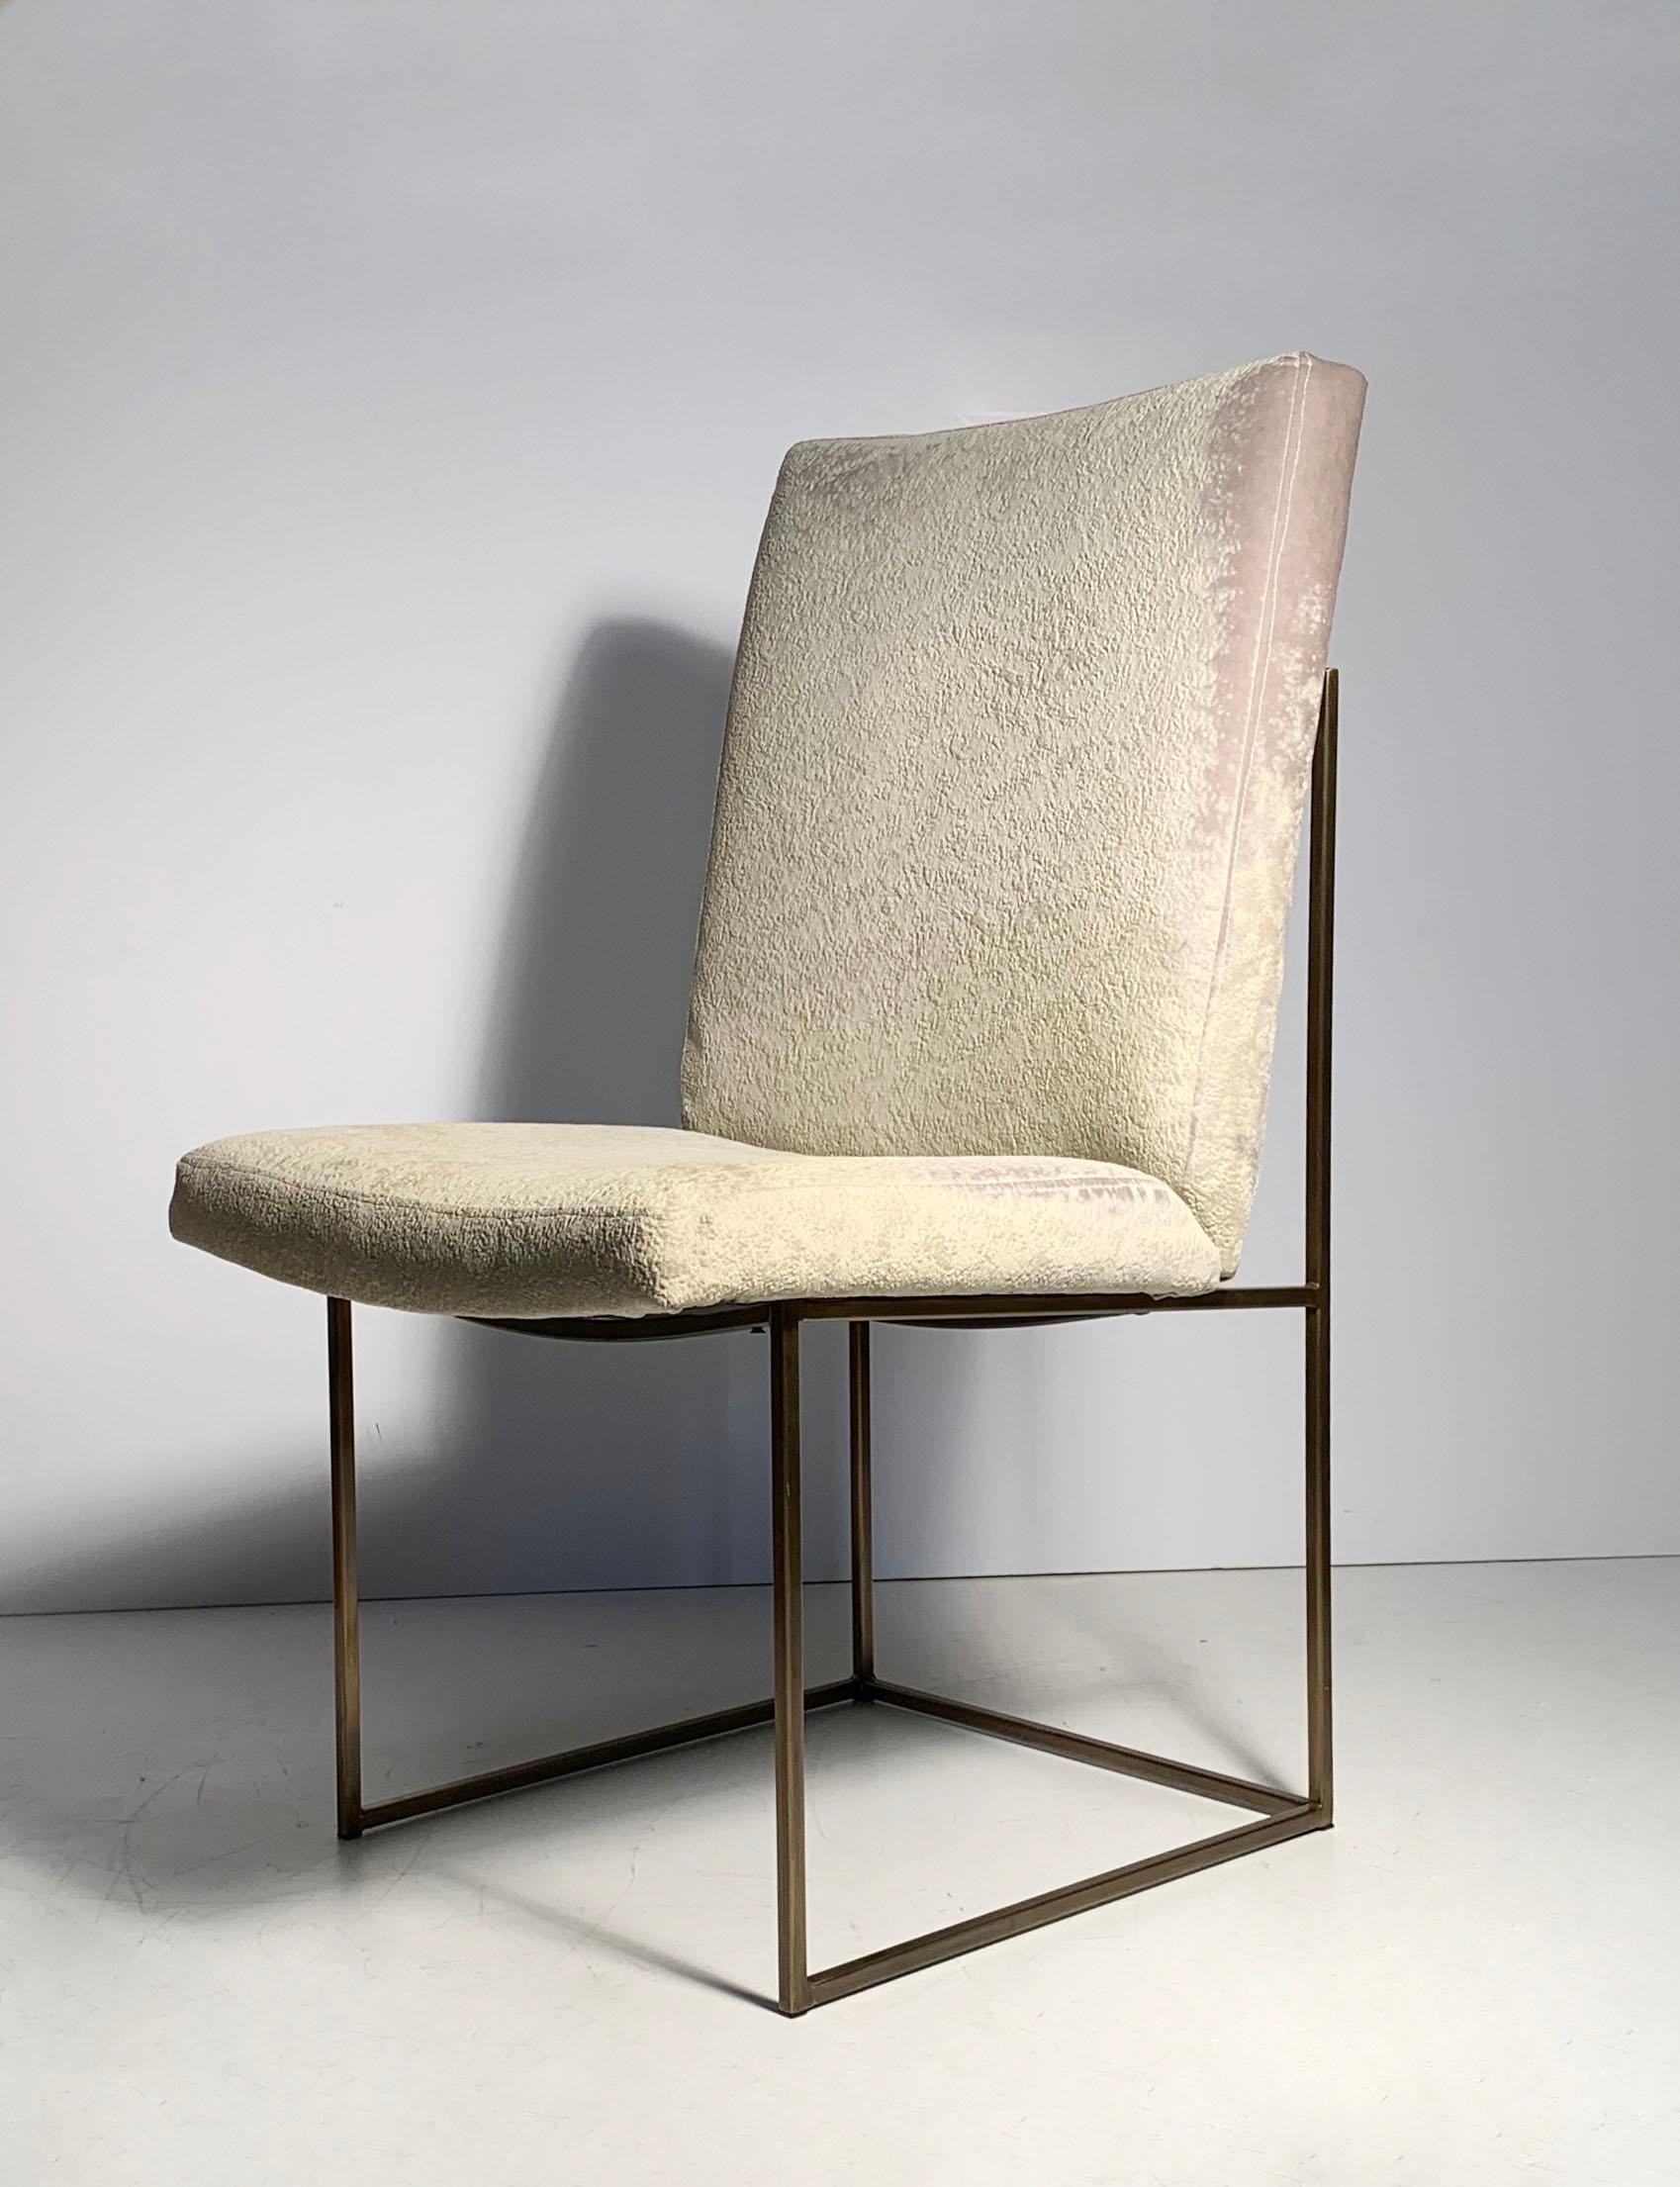 Milo Baughman set of 6 dining chairs in a bronze finish.

Ready to be reupholstered.